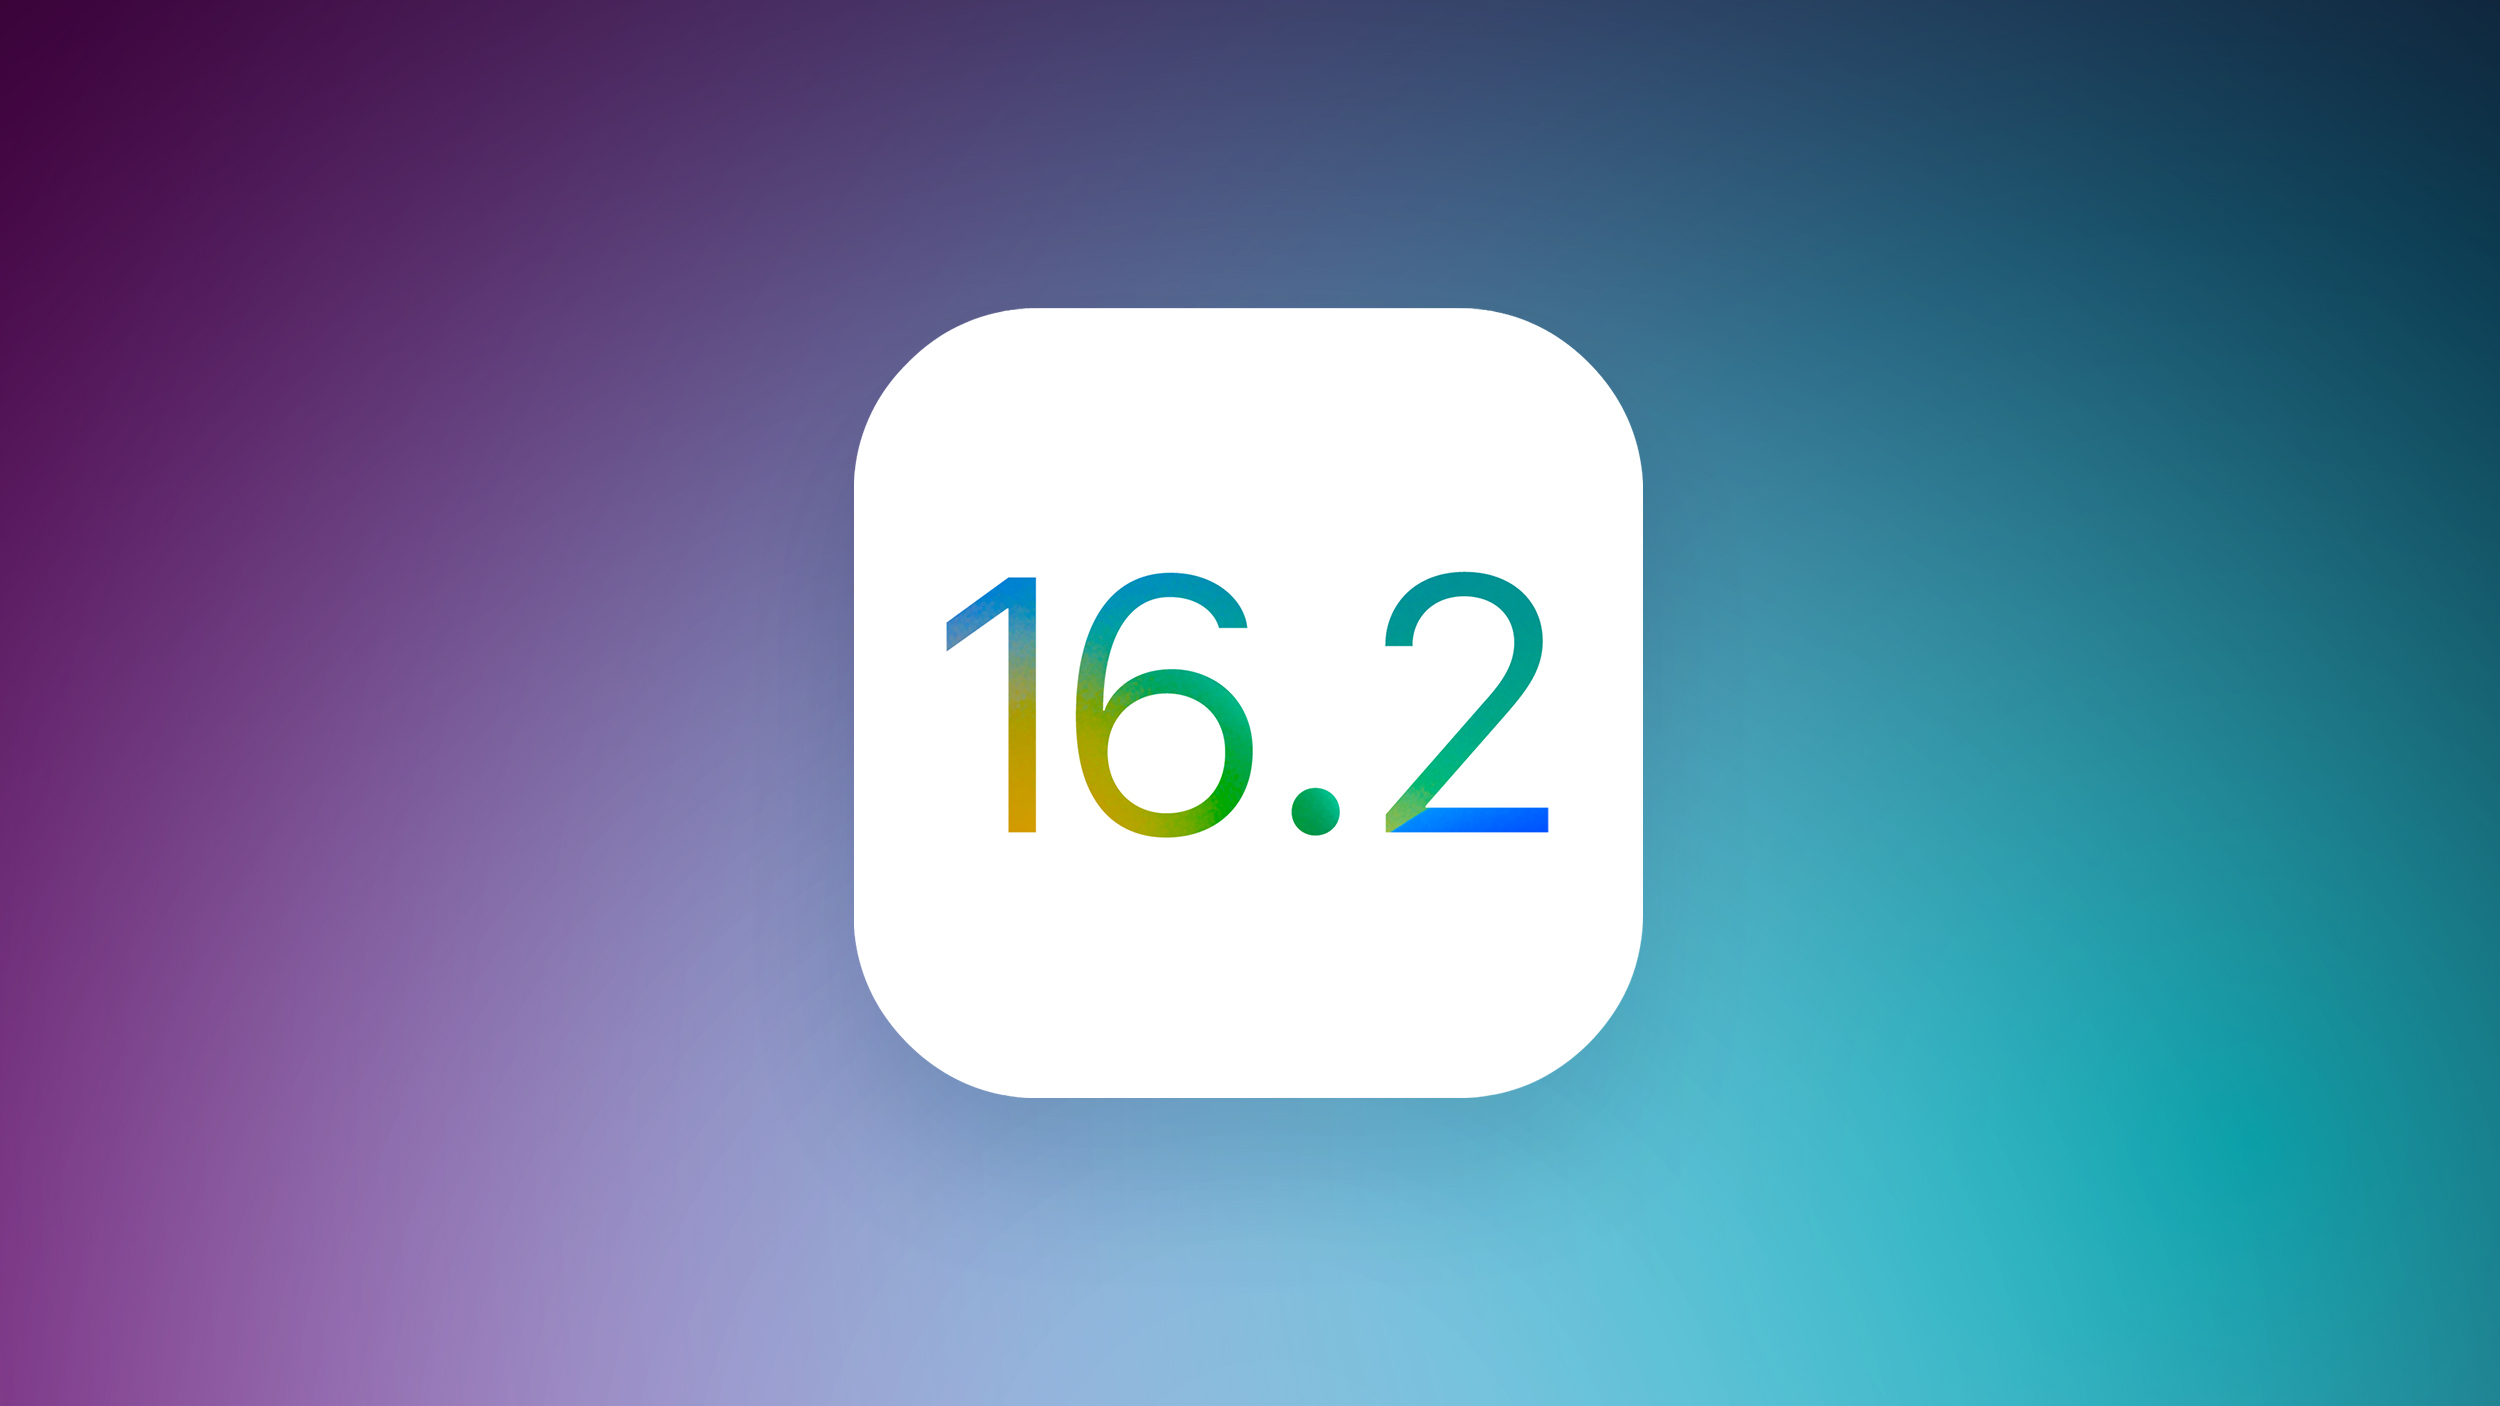 iOS 16.2 Expected to Launch in Mid-December With Several New Features